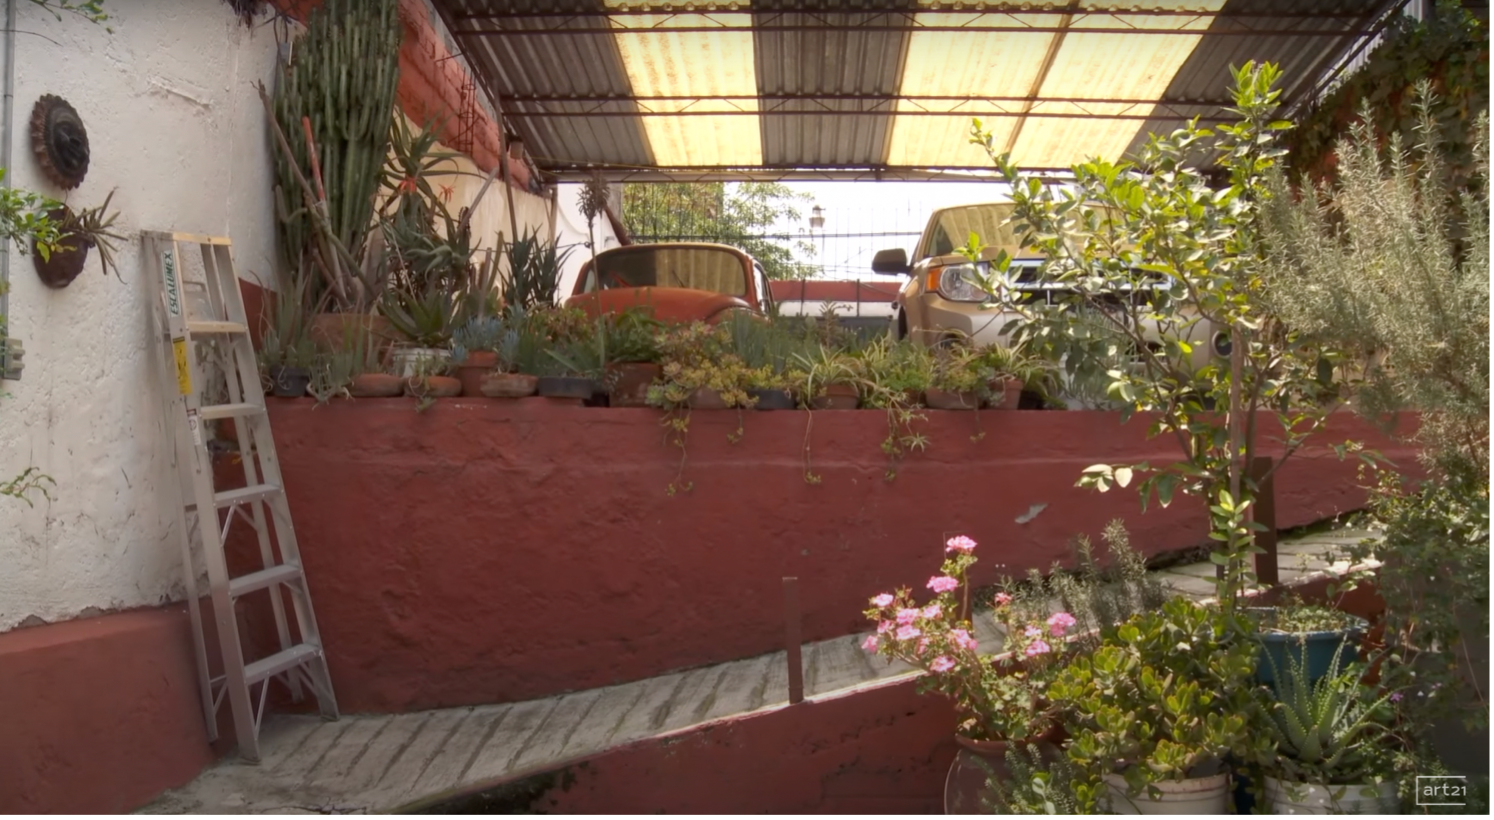 Figure 8. Ramp in the Cruzvillegas family house, still from Legacy (Sollins and Dowling, 2014).